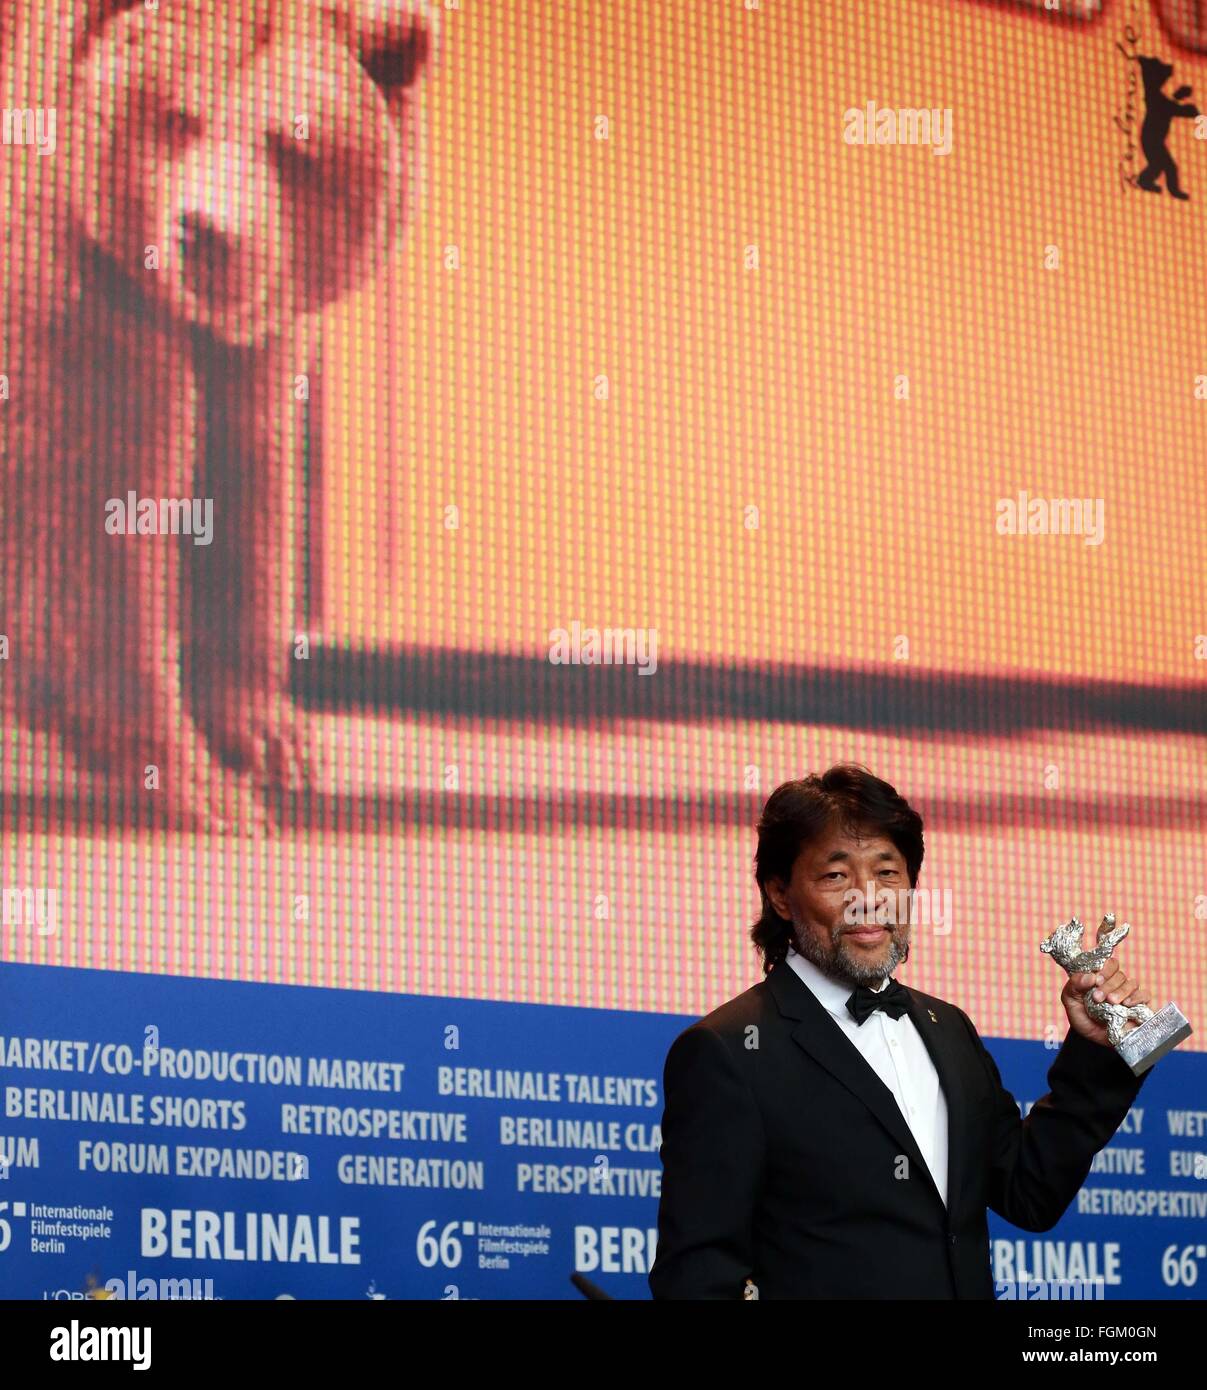 Berlin, Germany. 20th Feb, 2016. Mark Lee Ping-Bing, cinematographer of the movie "Crosscurrent" (Chang Jiang Tu), attends a press conference after receiving his Silver Bear for Outstanding Artistic Contribution at the awards ceremony of the 66th Berlinale International Film Festival in Berlin, Germany, Feb. 20, 2016. © Luo Huanhuan/Xinhua/Alamy Live News Stock Photo